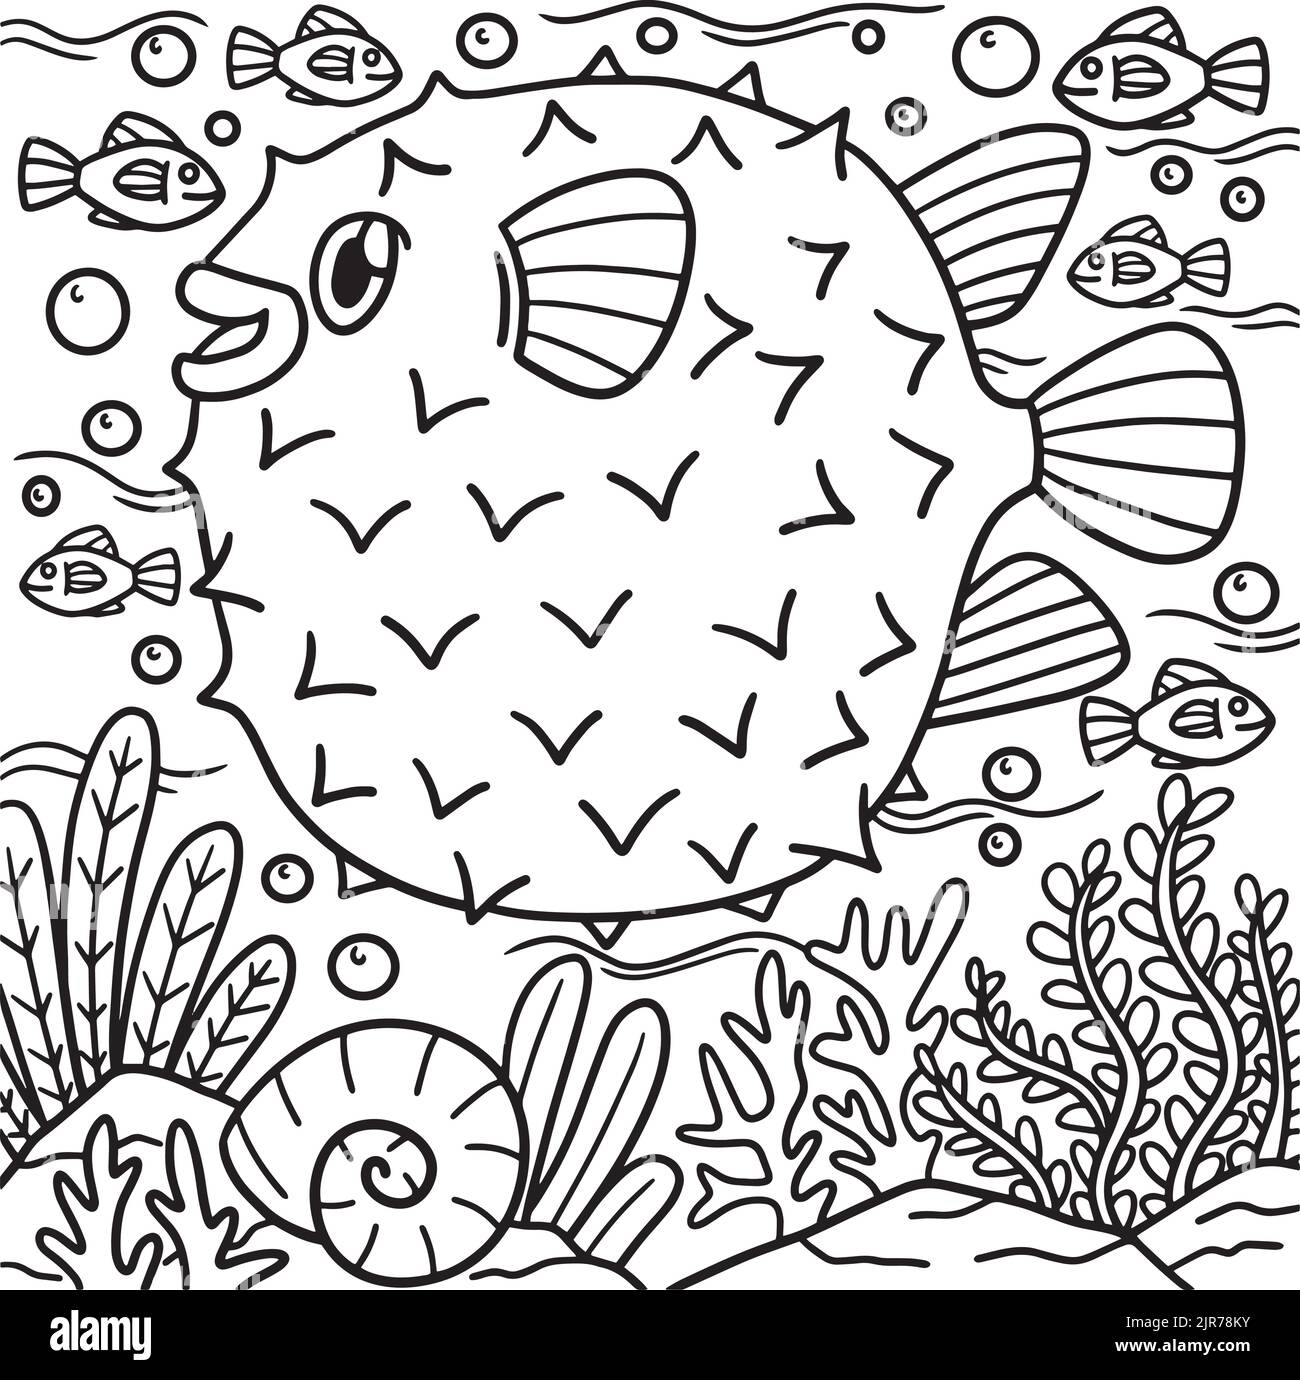 Pufferfish Coloring Page for Kids Stock Vector